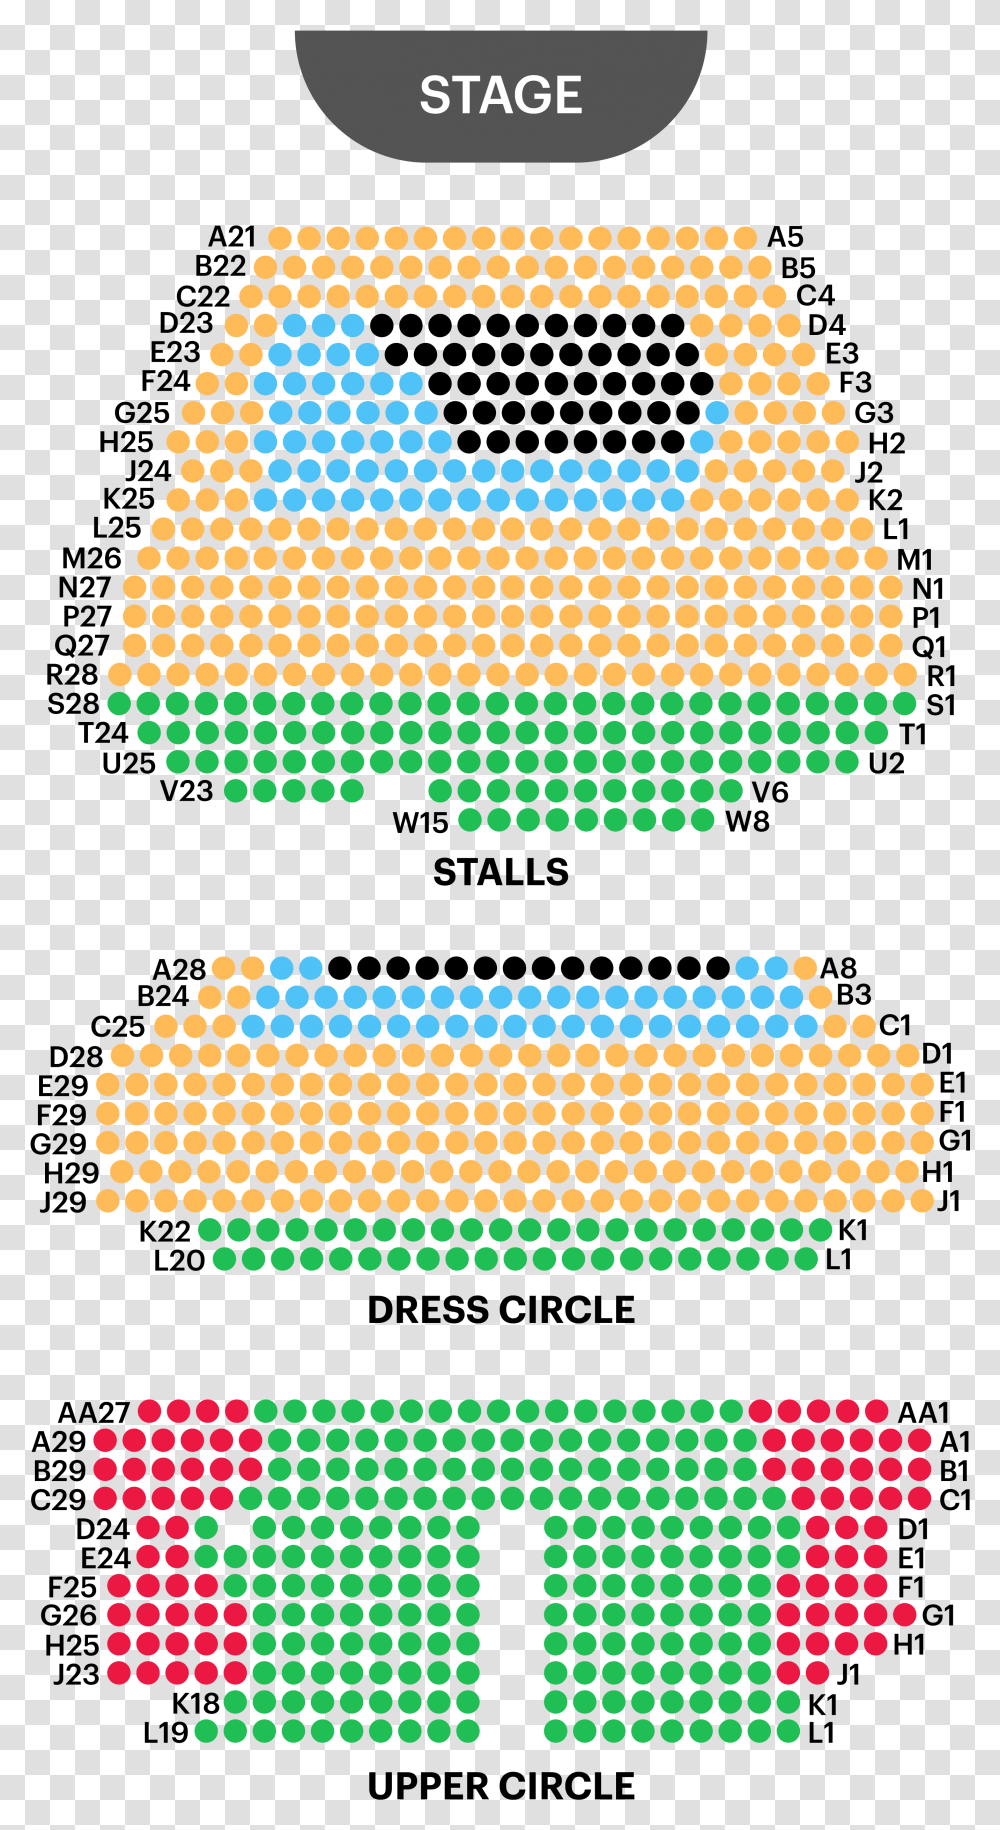 Queens Theatre Seating Map Layout Wyndham's Theatre Seating Plan, Honeycomb, Food, Pattern Transparent Png